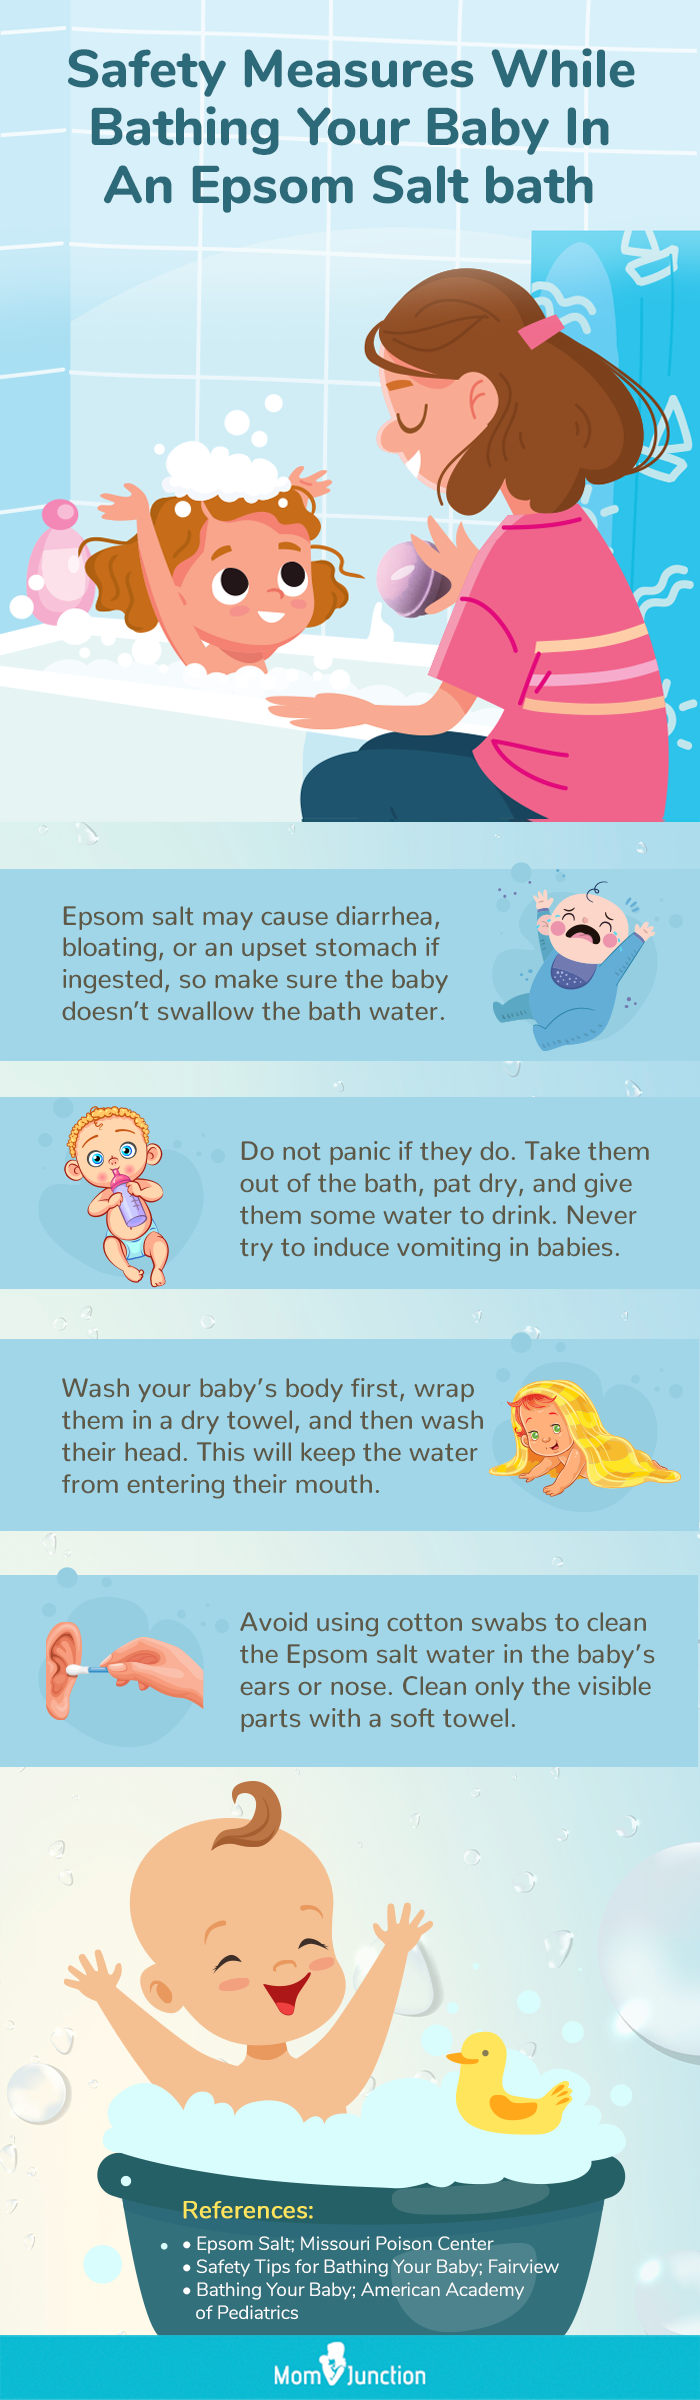 safety measures while bathing your baby in an epsom salt bath (infographic)